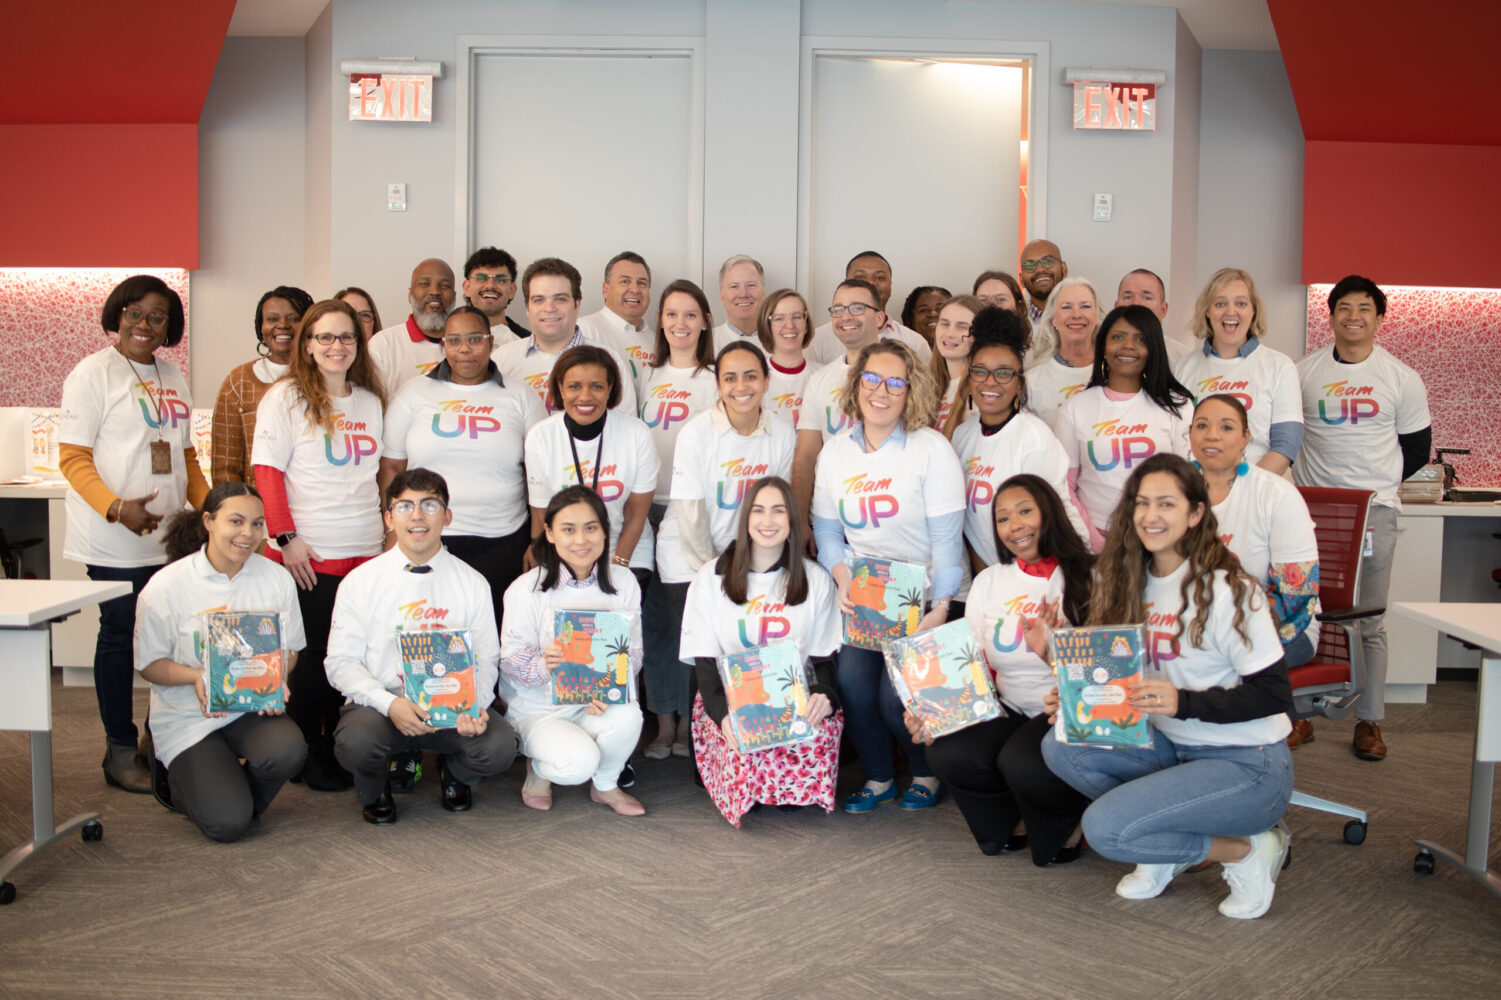 Comcast Central Division Joins Happy Hope Foundation to Build Supply Kits for Hospitalized Children